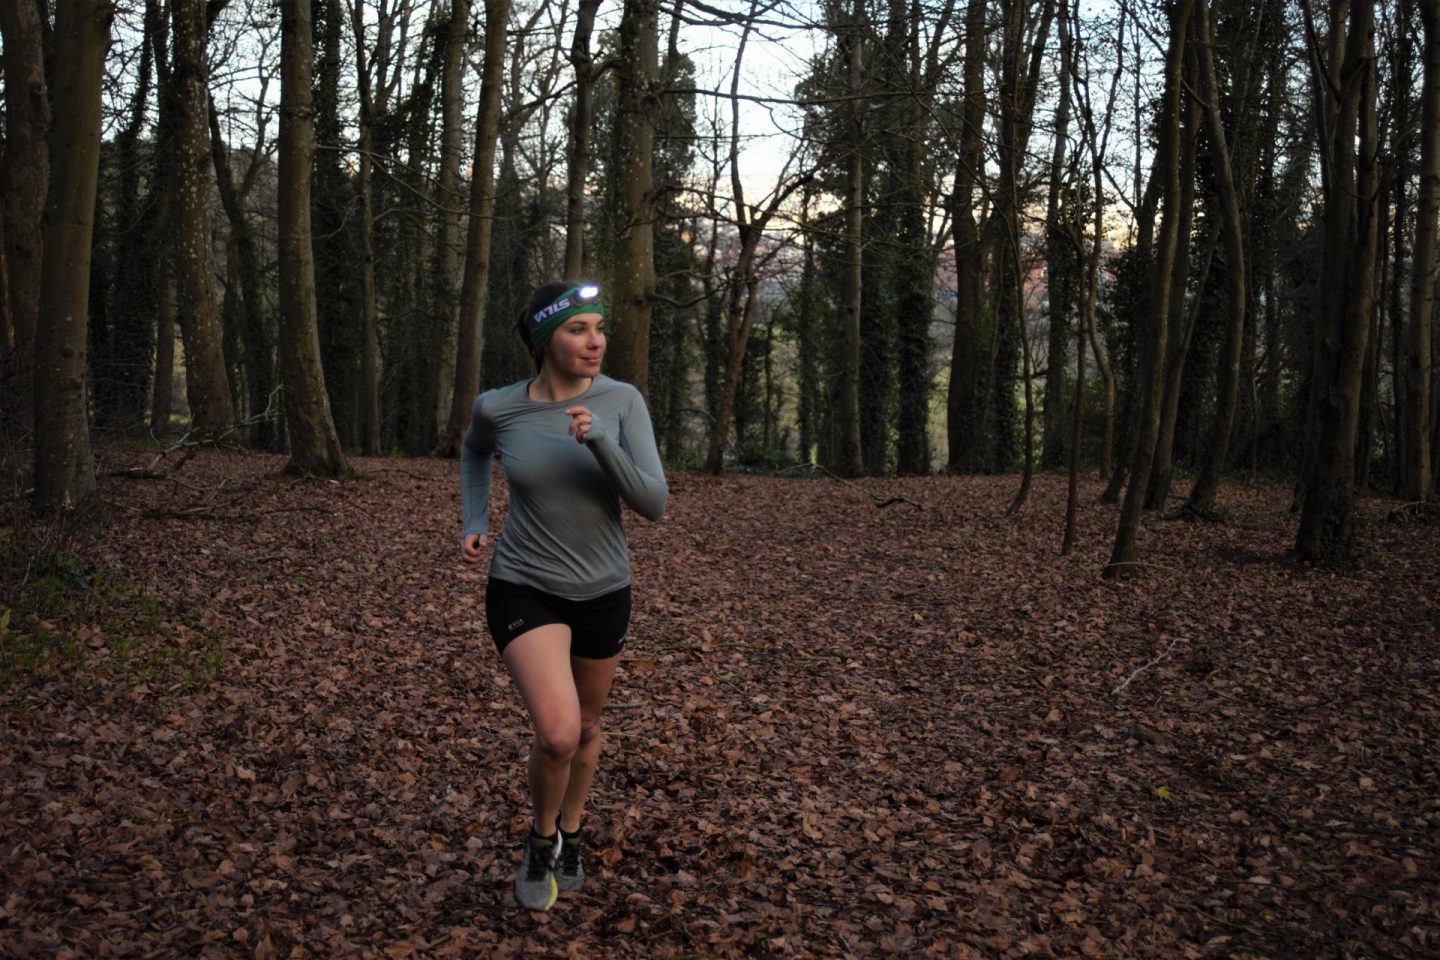 Making every mile count – running 1,000 miles in 2022 with Montane and Trail Running Magazine